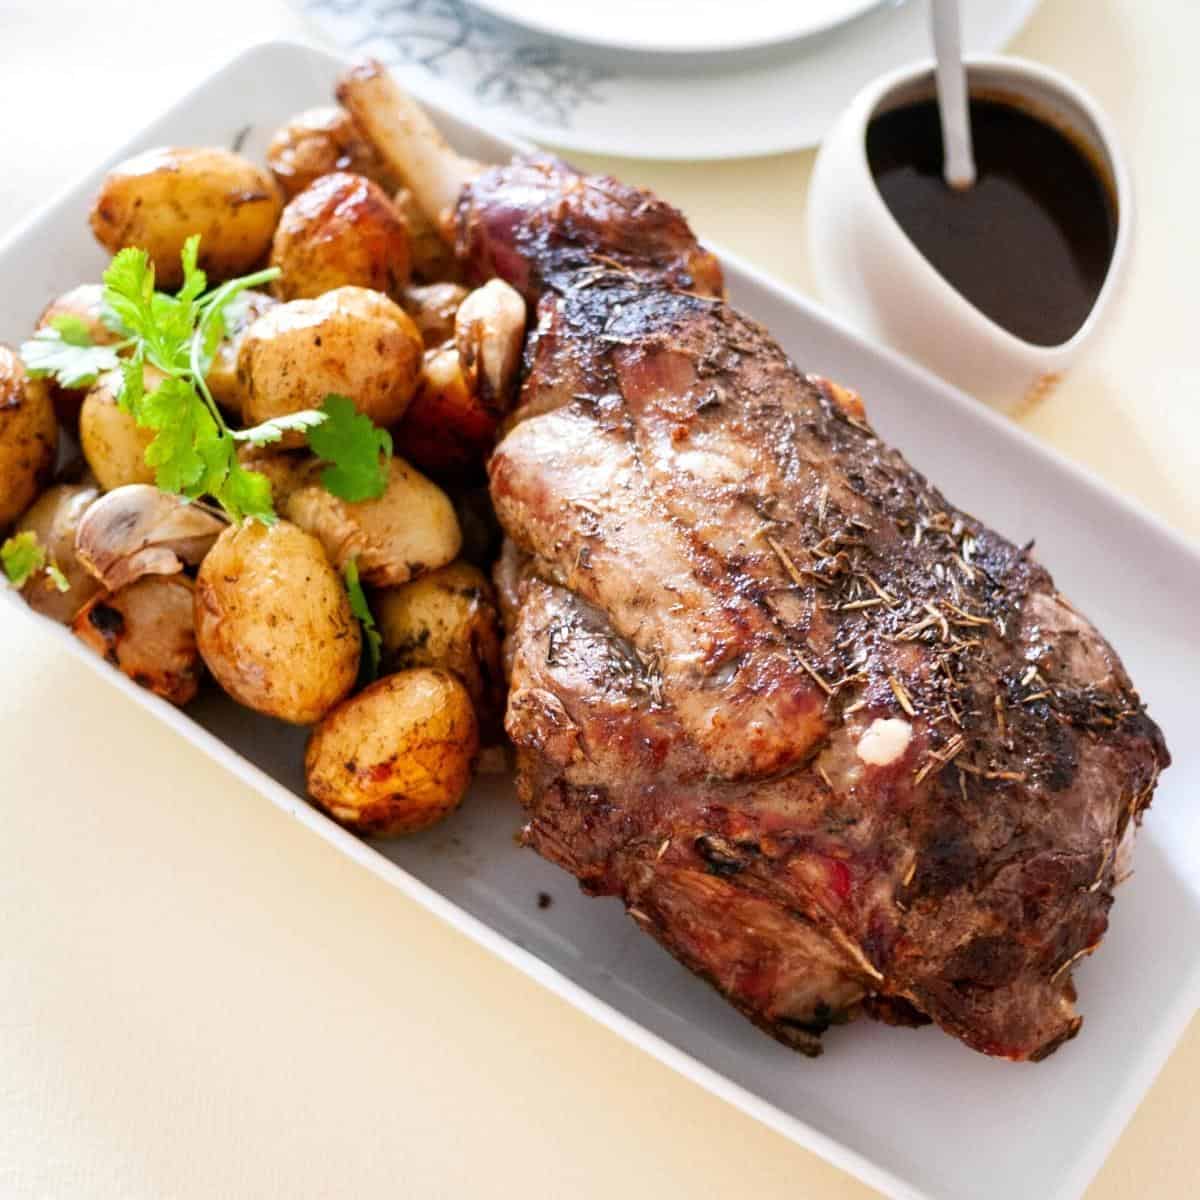 A platter with roasted baby potatoes with lamb.